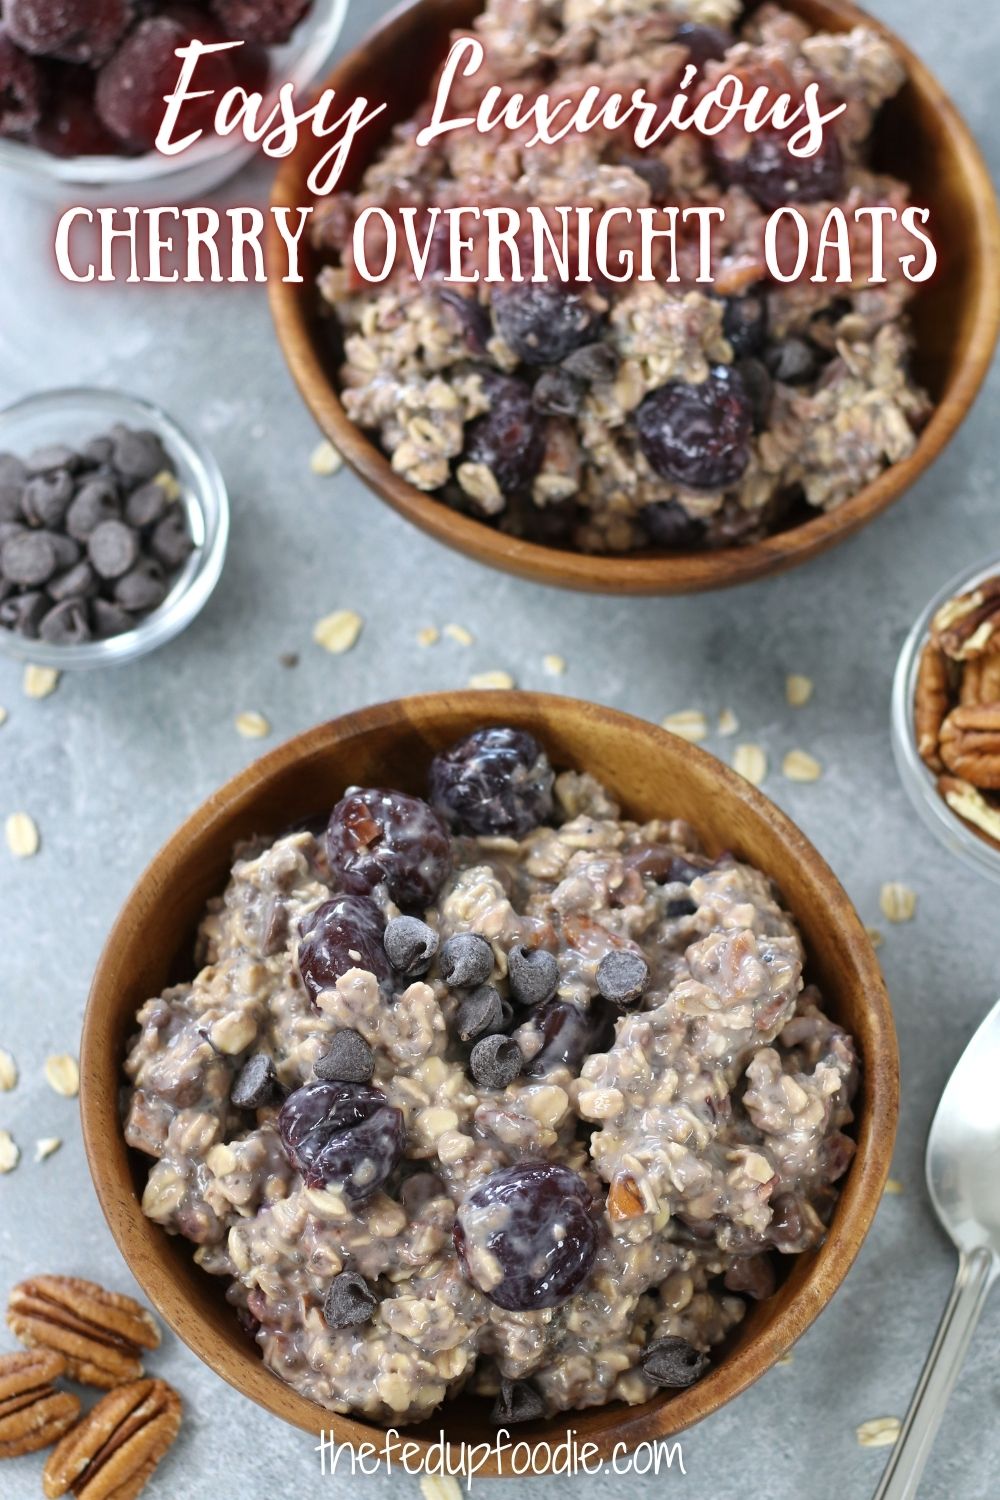 Cherry Overnight Oats is an incredibly easy, healthy and luxurious breakfast meal prep recipe perfect for busy mornings. This recipe has vegan options and is loaded with the wholesome ingredients of chia seeds, flax and rolled oats. 
#OvernightOats #OvernightOatsHealthy #OvernightOatsWithChiaSeeds #VeganOvernightOats #HealthyOvernightOatmeal #CherryOvernightOats #ChocolateCherryOvernightOats #CherryOvernightOatsHealthy